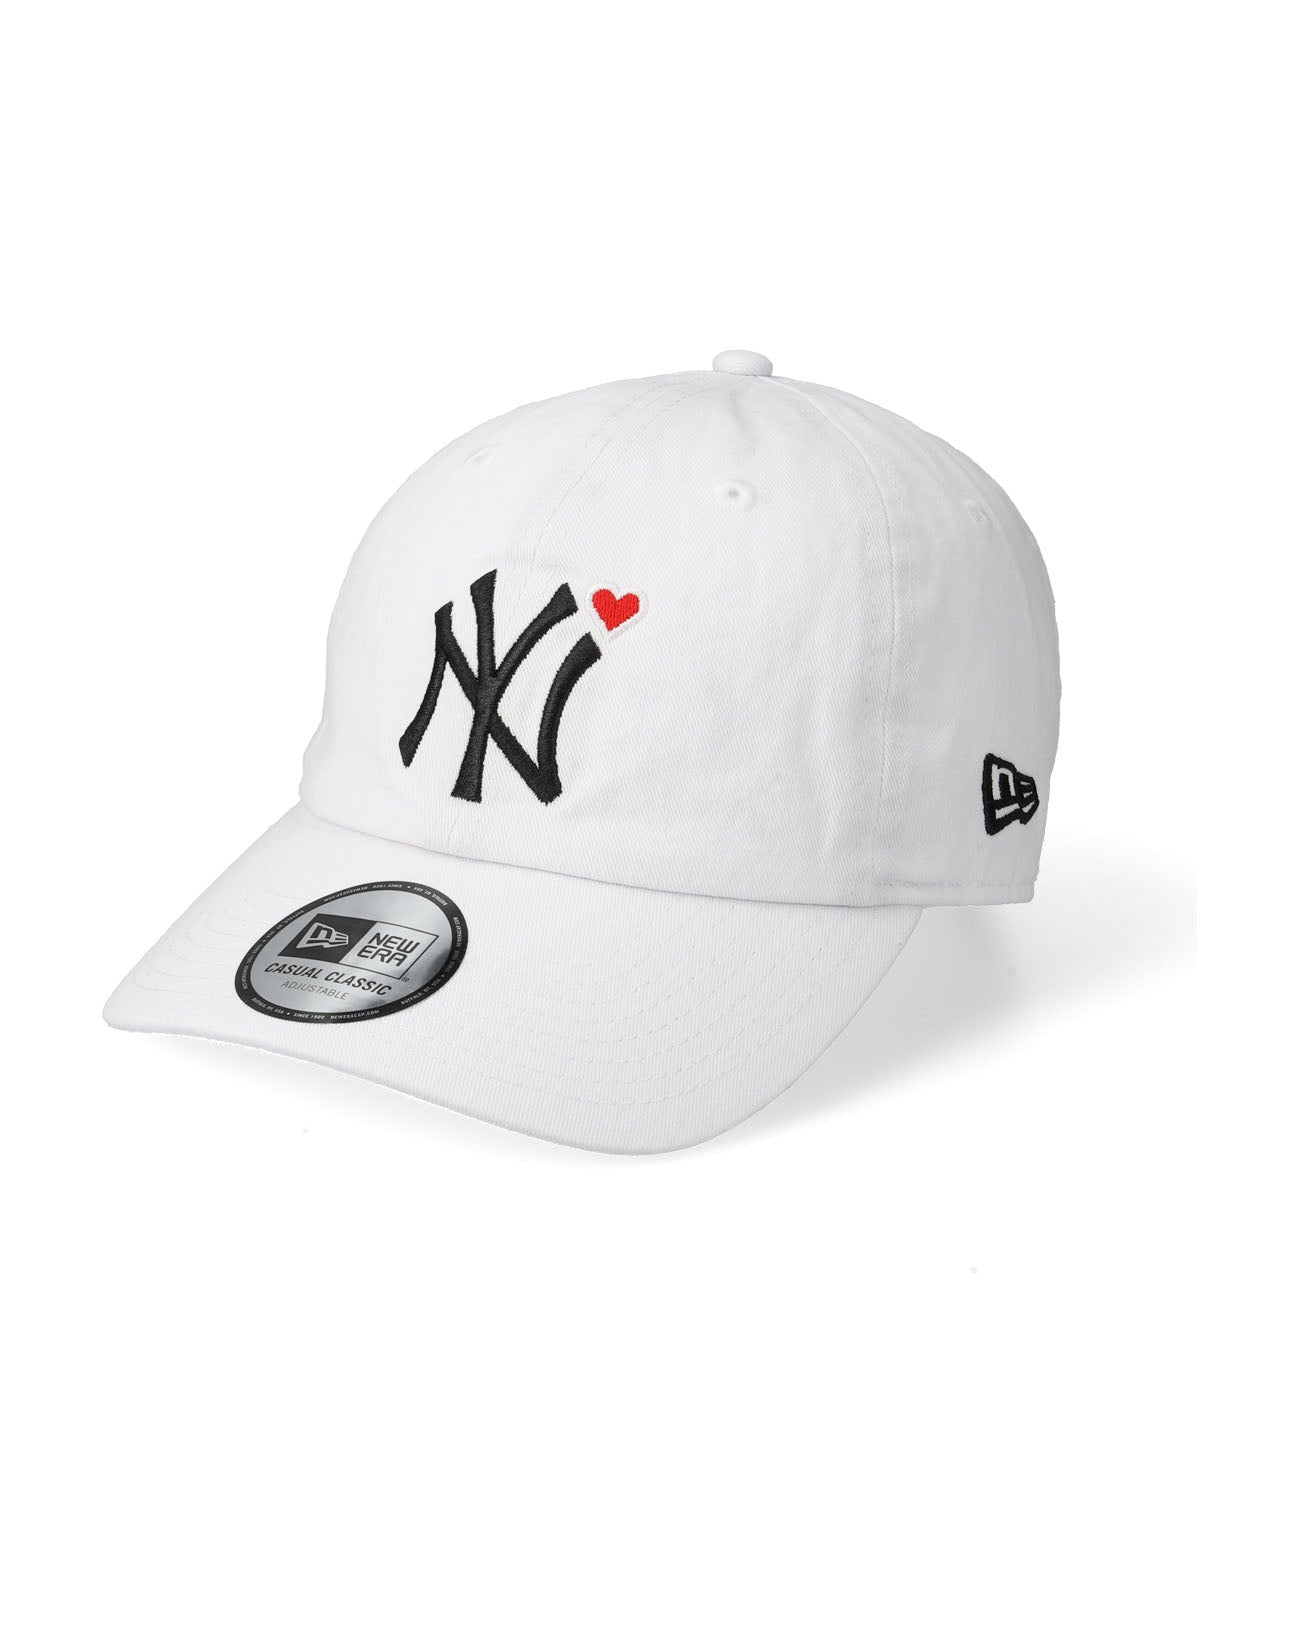 Yankees "RED" Heart Embroidery Cap - white